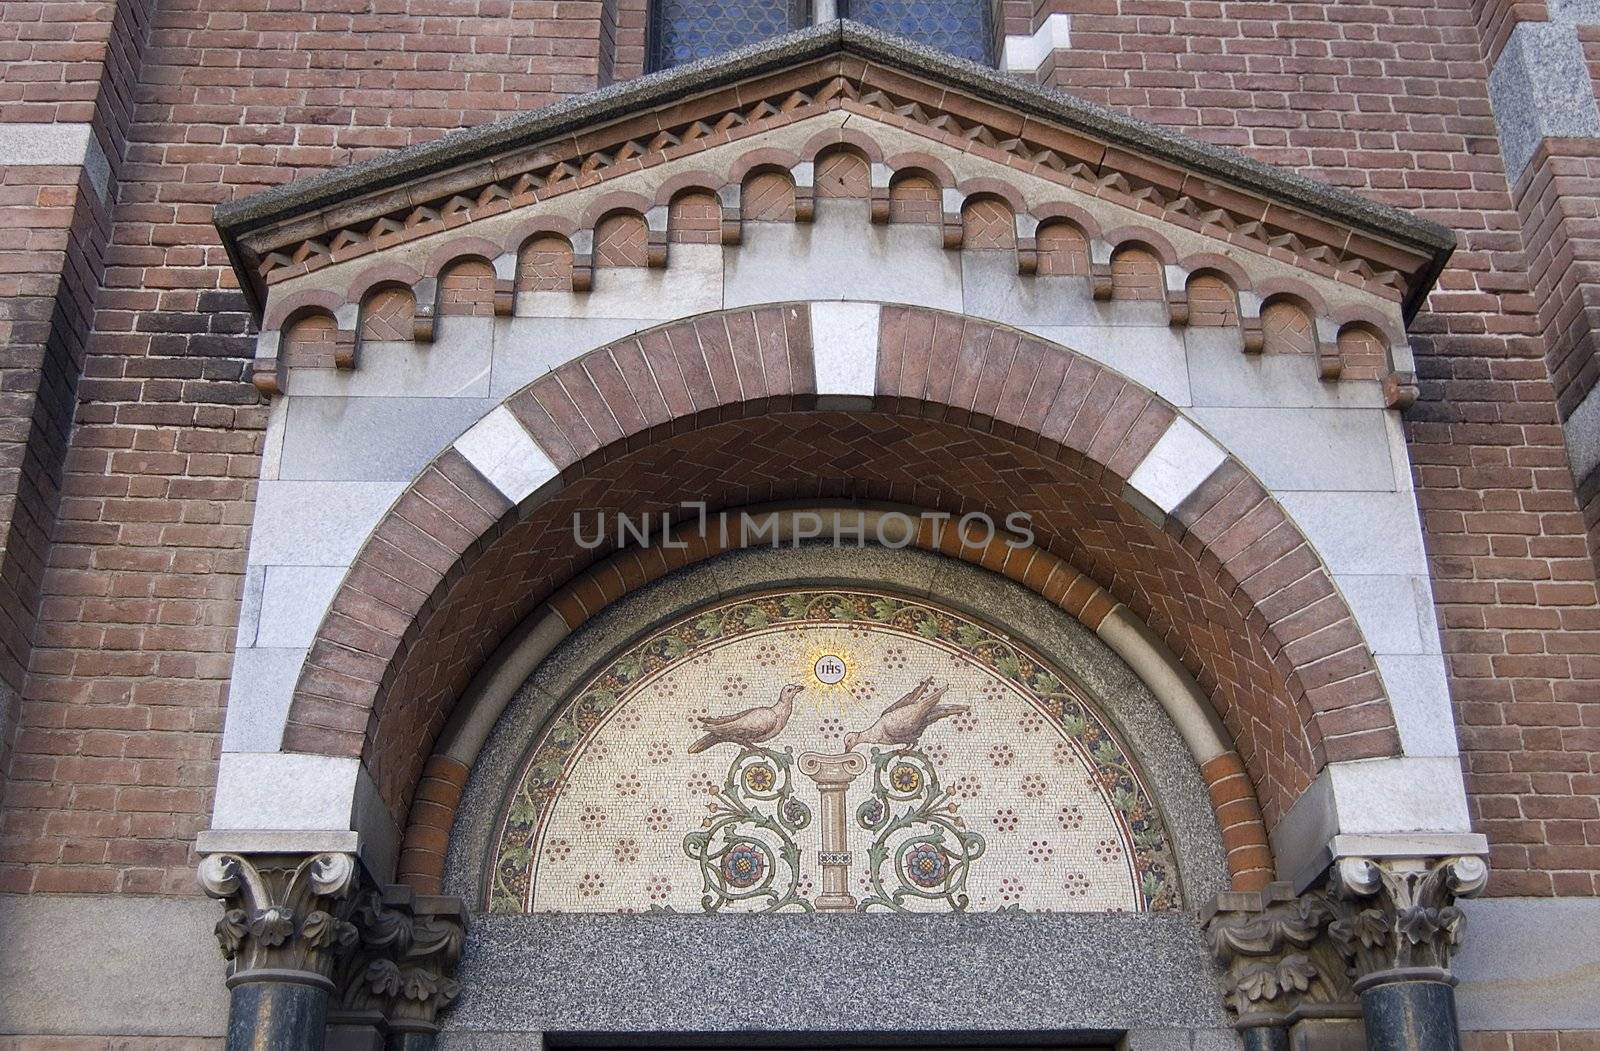 A mosaic in a arch of an old church